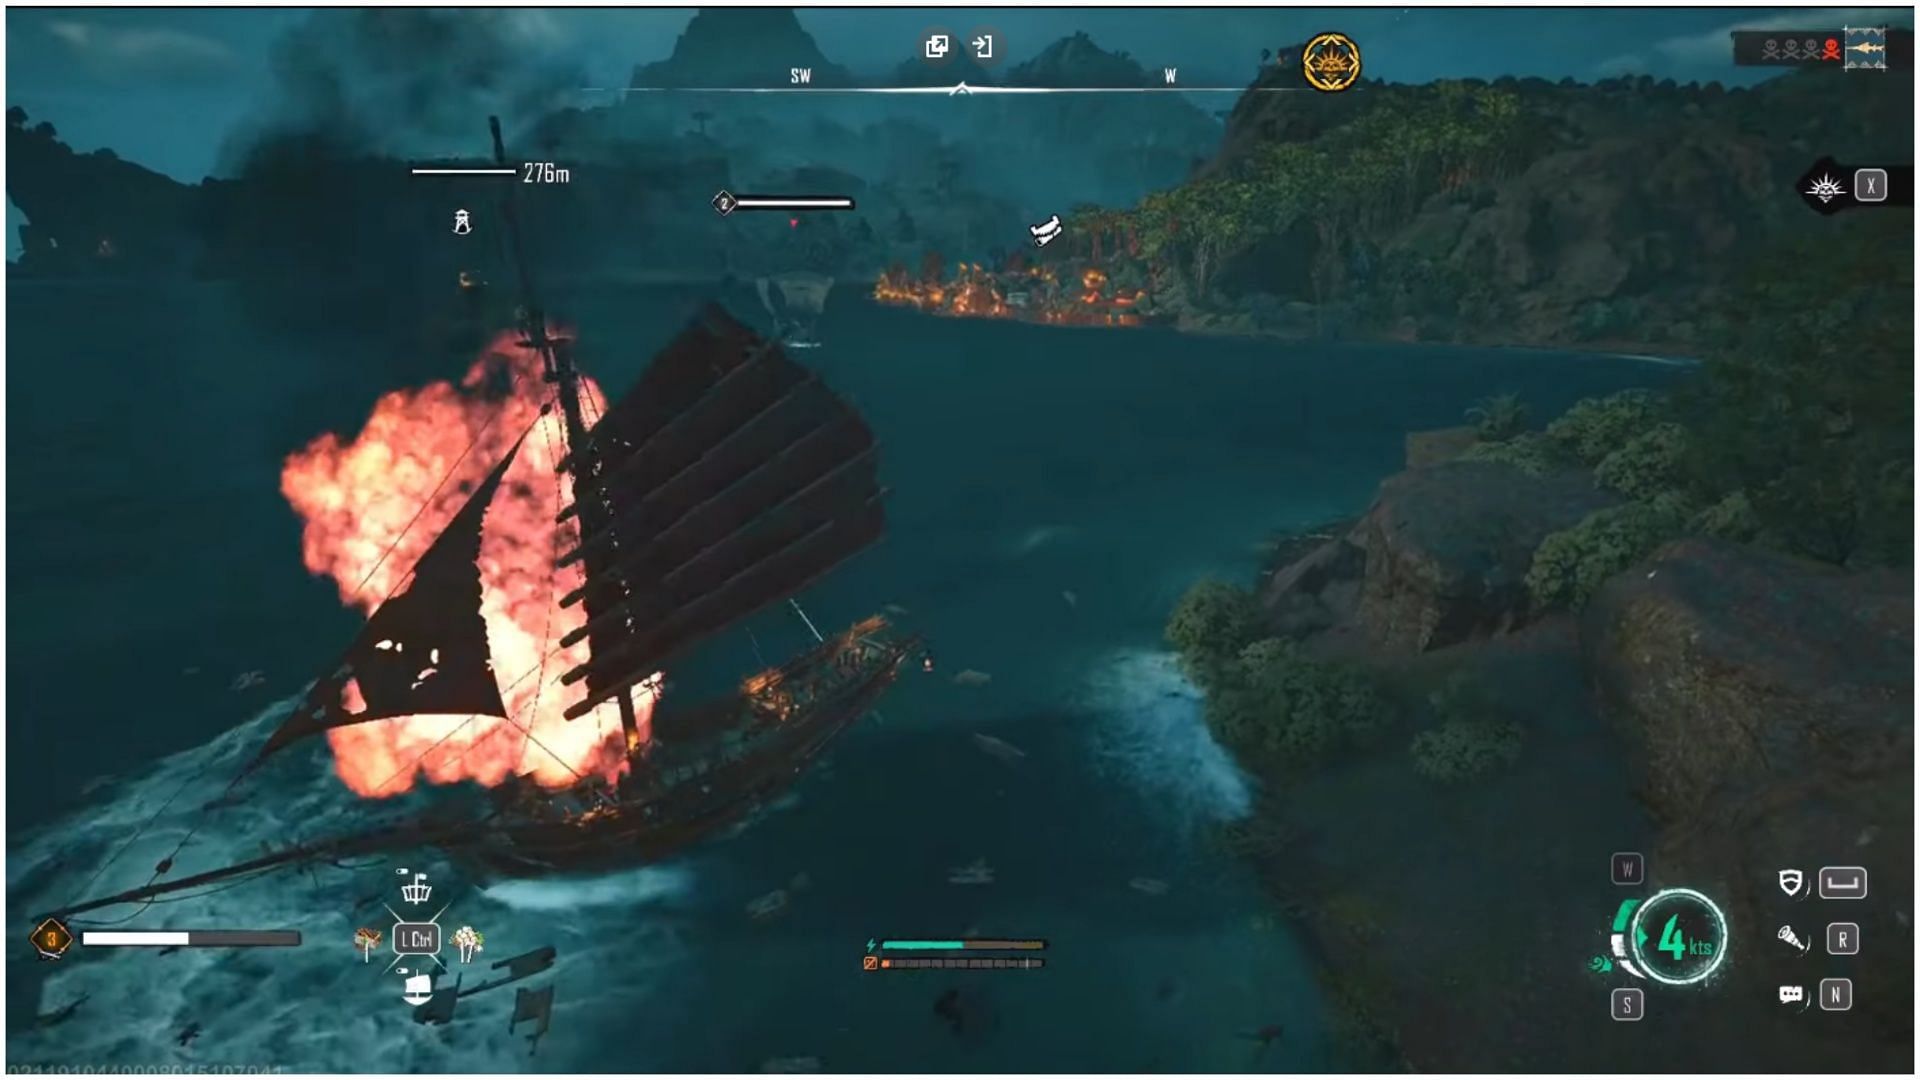 Whether sinking or boarding, you can gain Infamy here too (Image via Ubisoft)